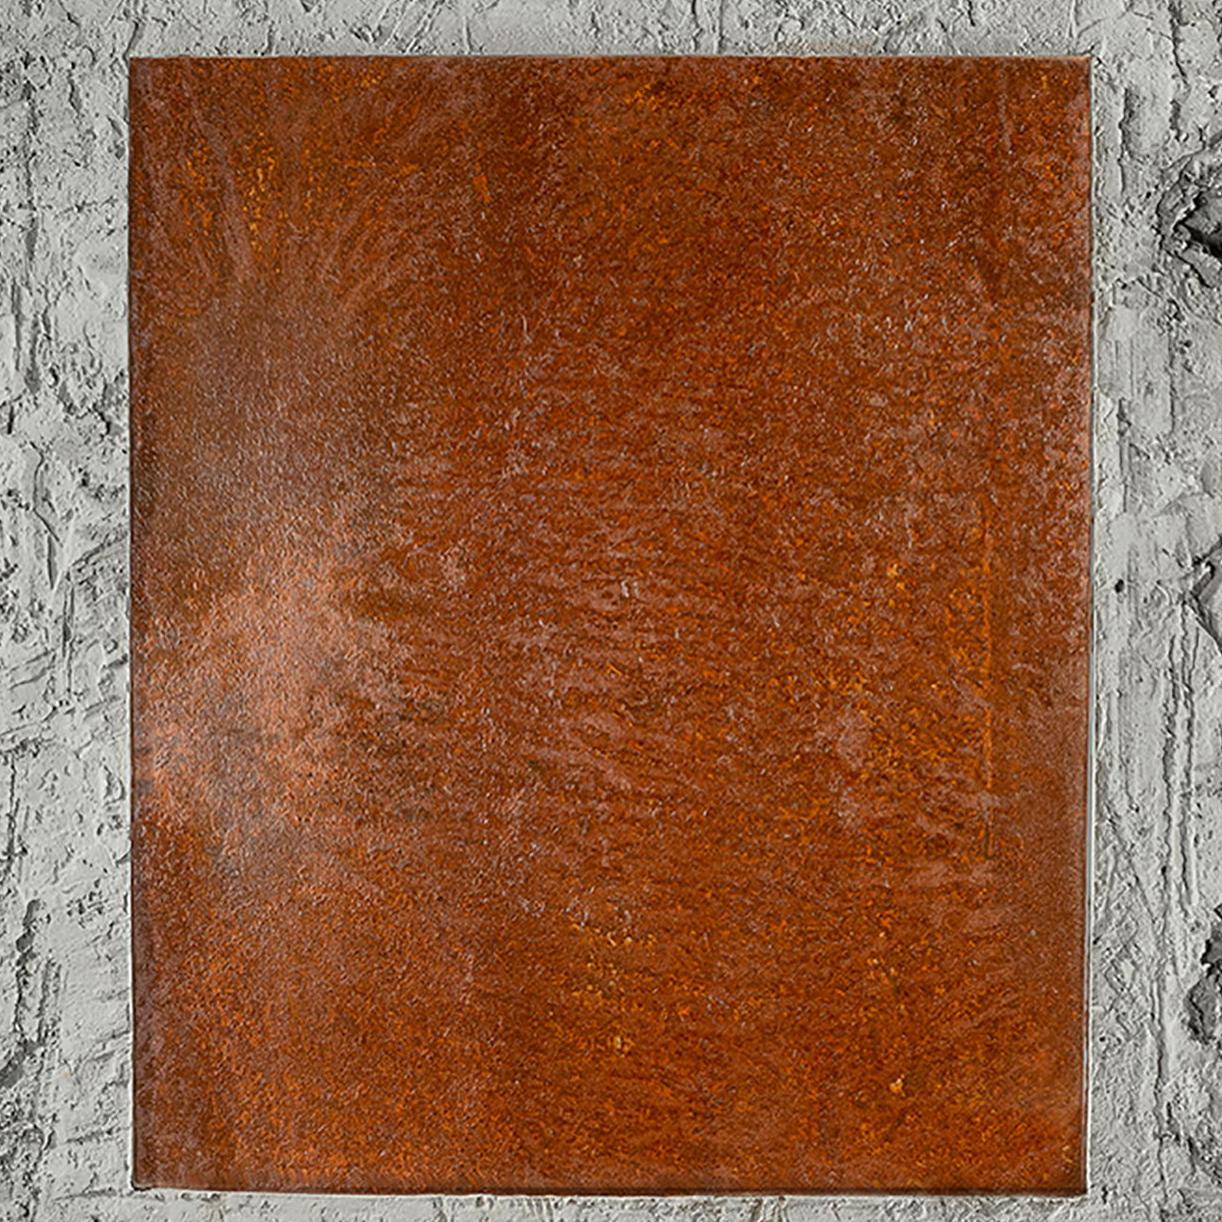 Still Steel (Abstract painting) For Sale 1